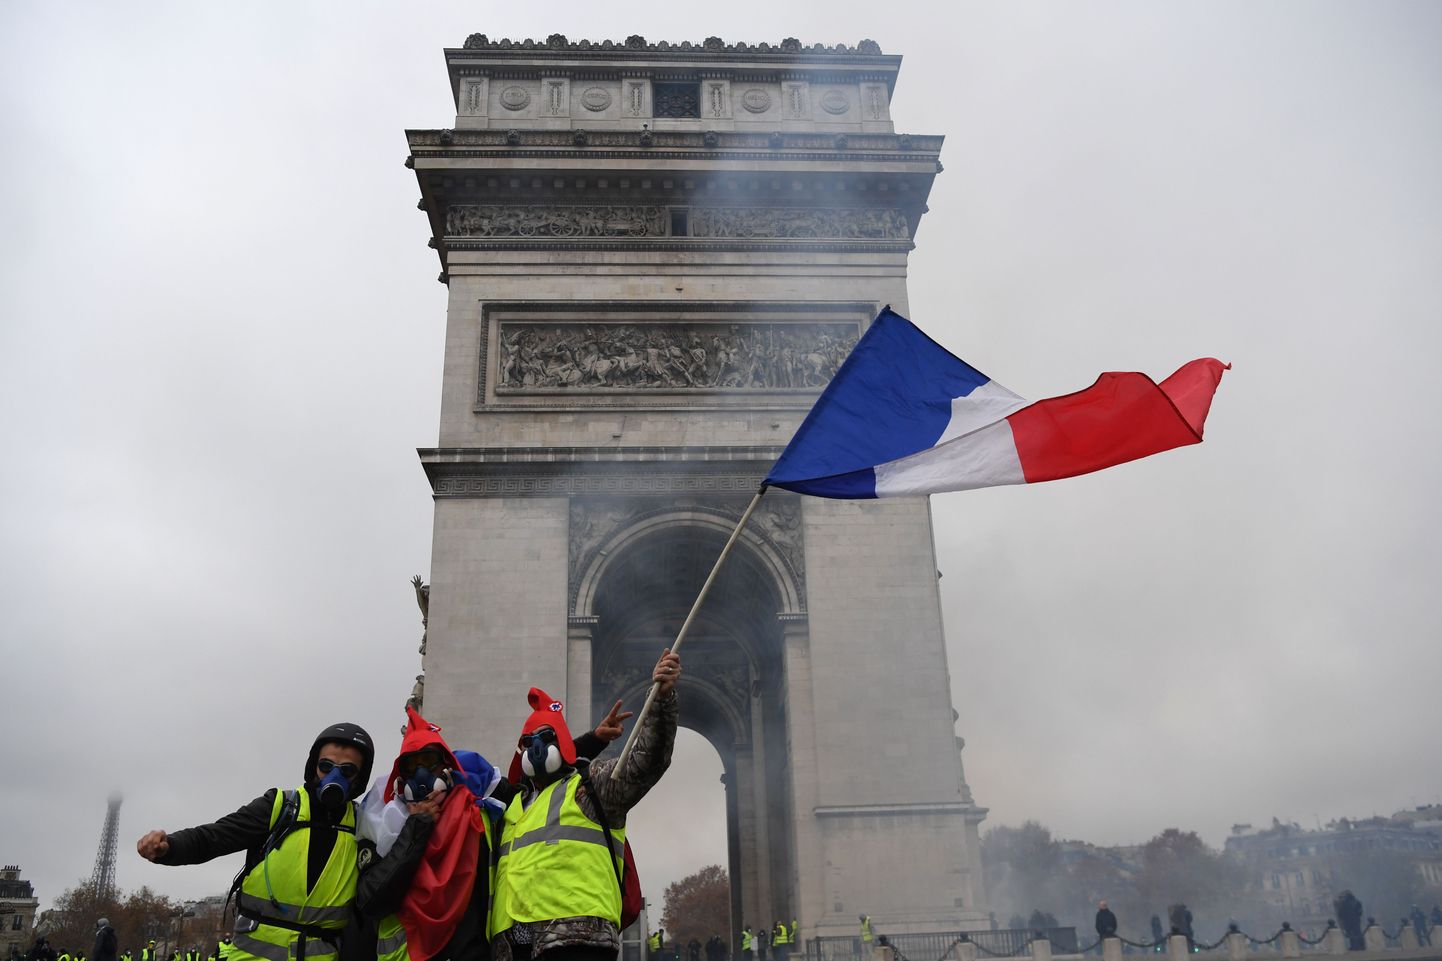 Demonstrators pose with a French flag with the Arc de Triomphe in background during a protest of Yellow Vests (Gilets jaunes) against rising oil prices and living costs on the Champs Elysees in Paris, on December 1, 2018. - Thousands of anti-government protesters are expected today on the Champs-Elysees in Paris, a week after a violent demonstration on the famed avenue was marked by burning barricades and rampant vandalism that President Emmanuel Macron compared to "war scenes". (Photo by Alain JOCARD / AFP)